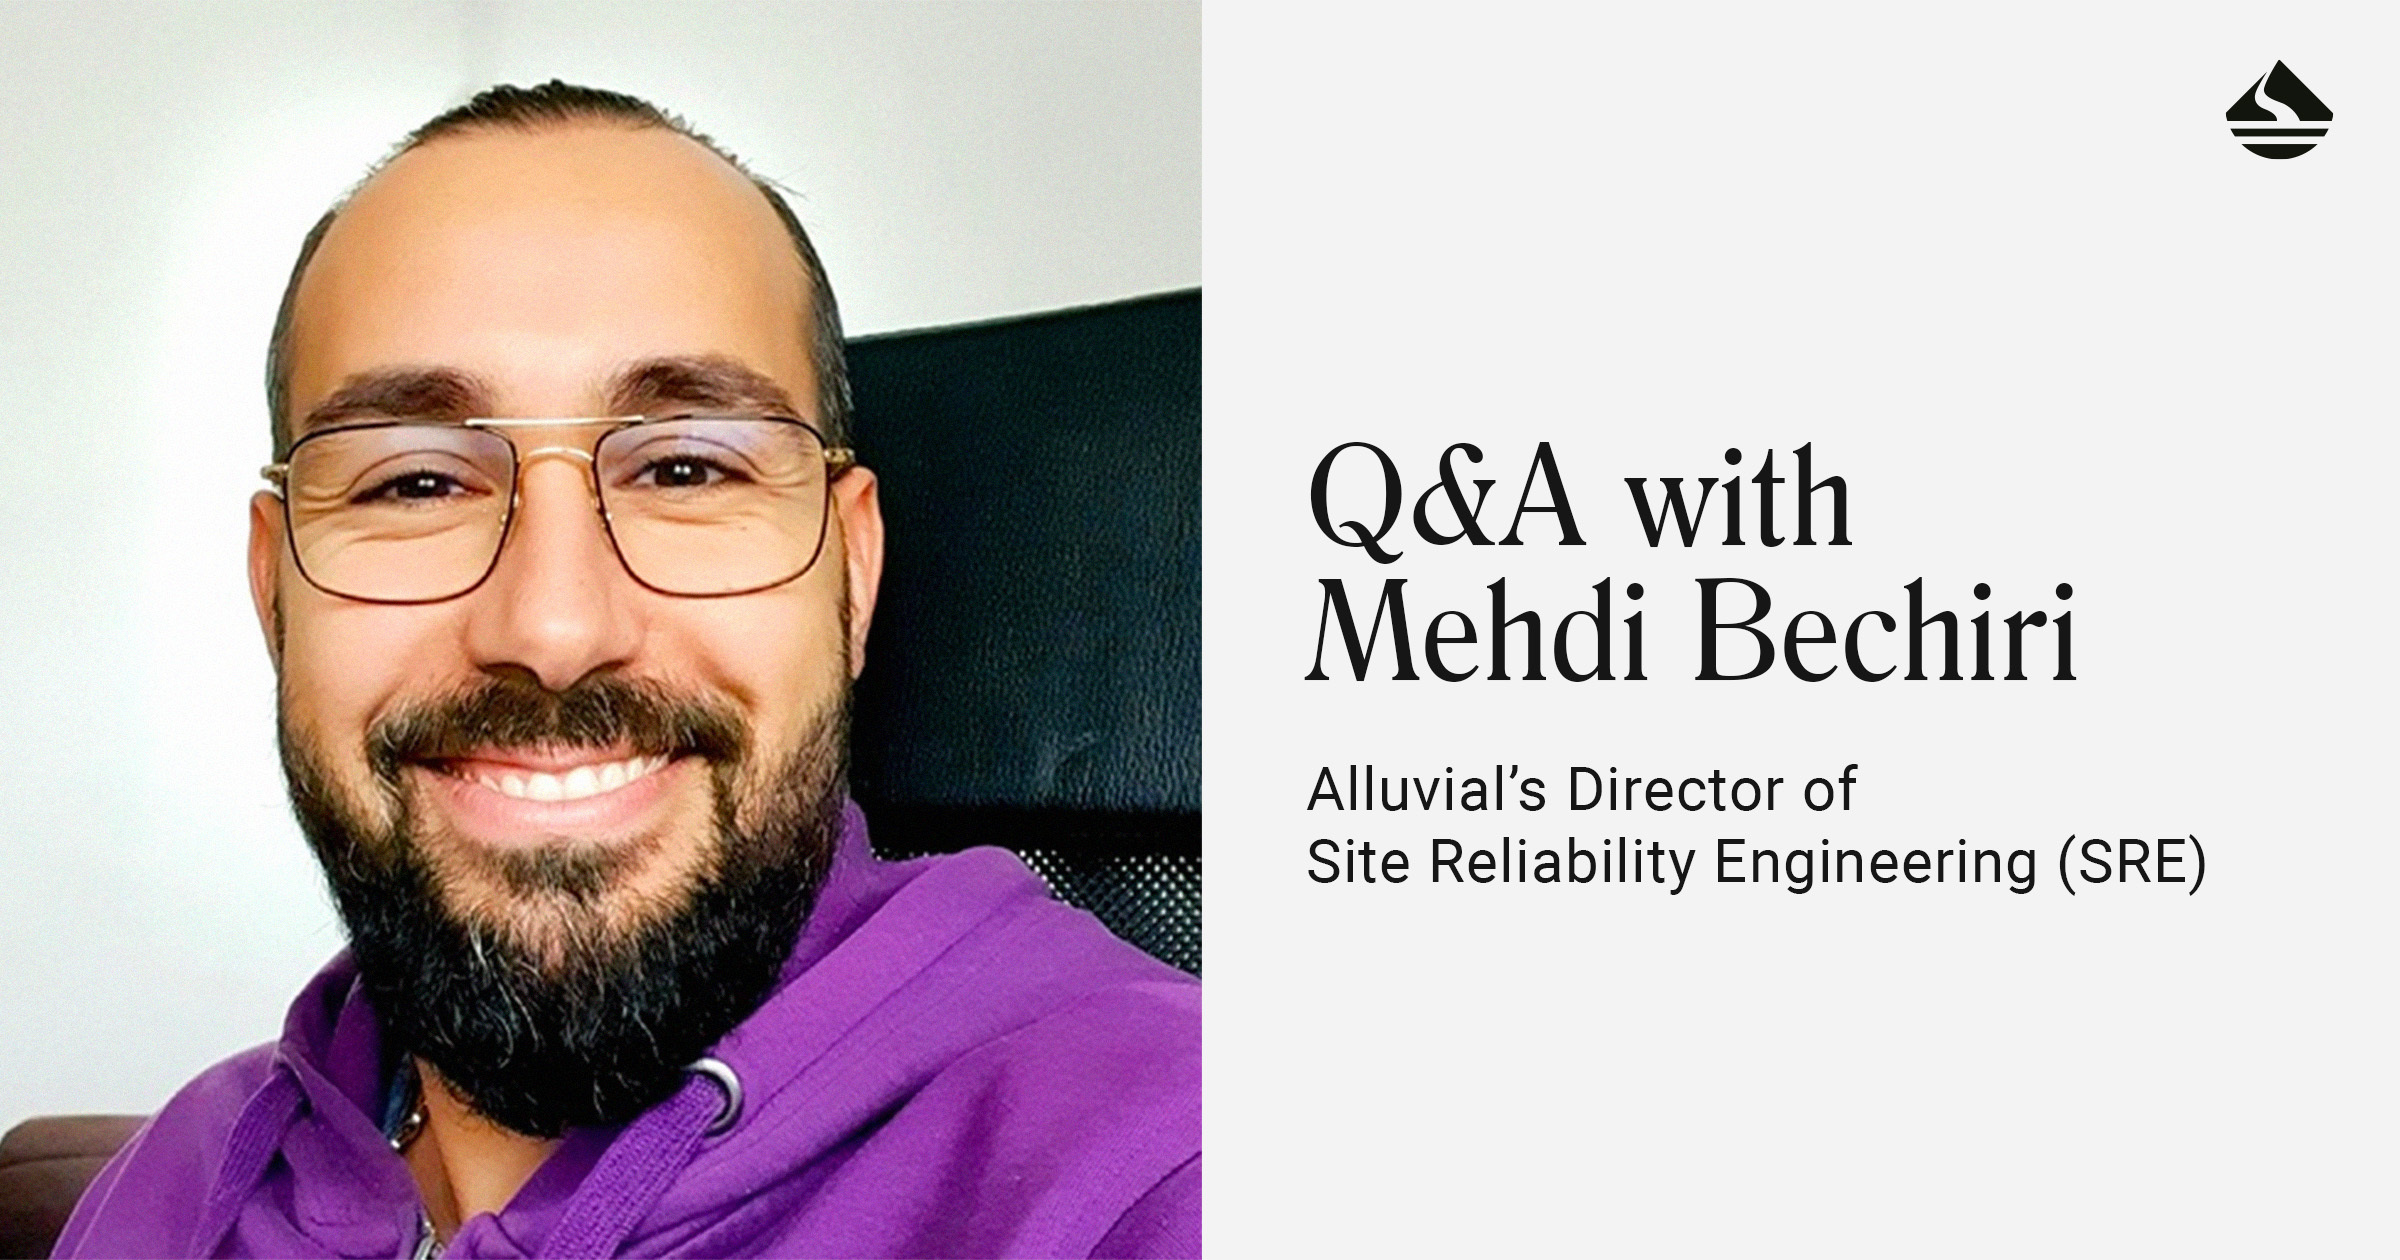 Q&A with Mehdi Bechiri, Alluvial's Director of Site Reliability Engineering (SRE)